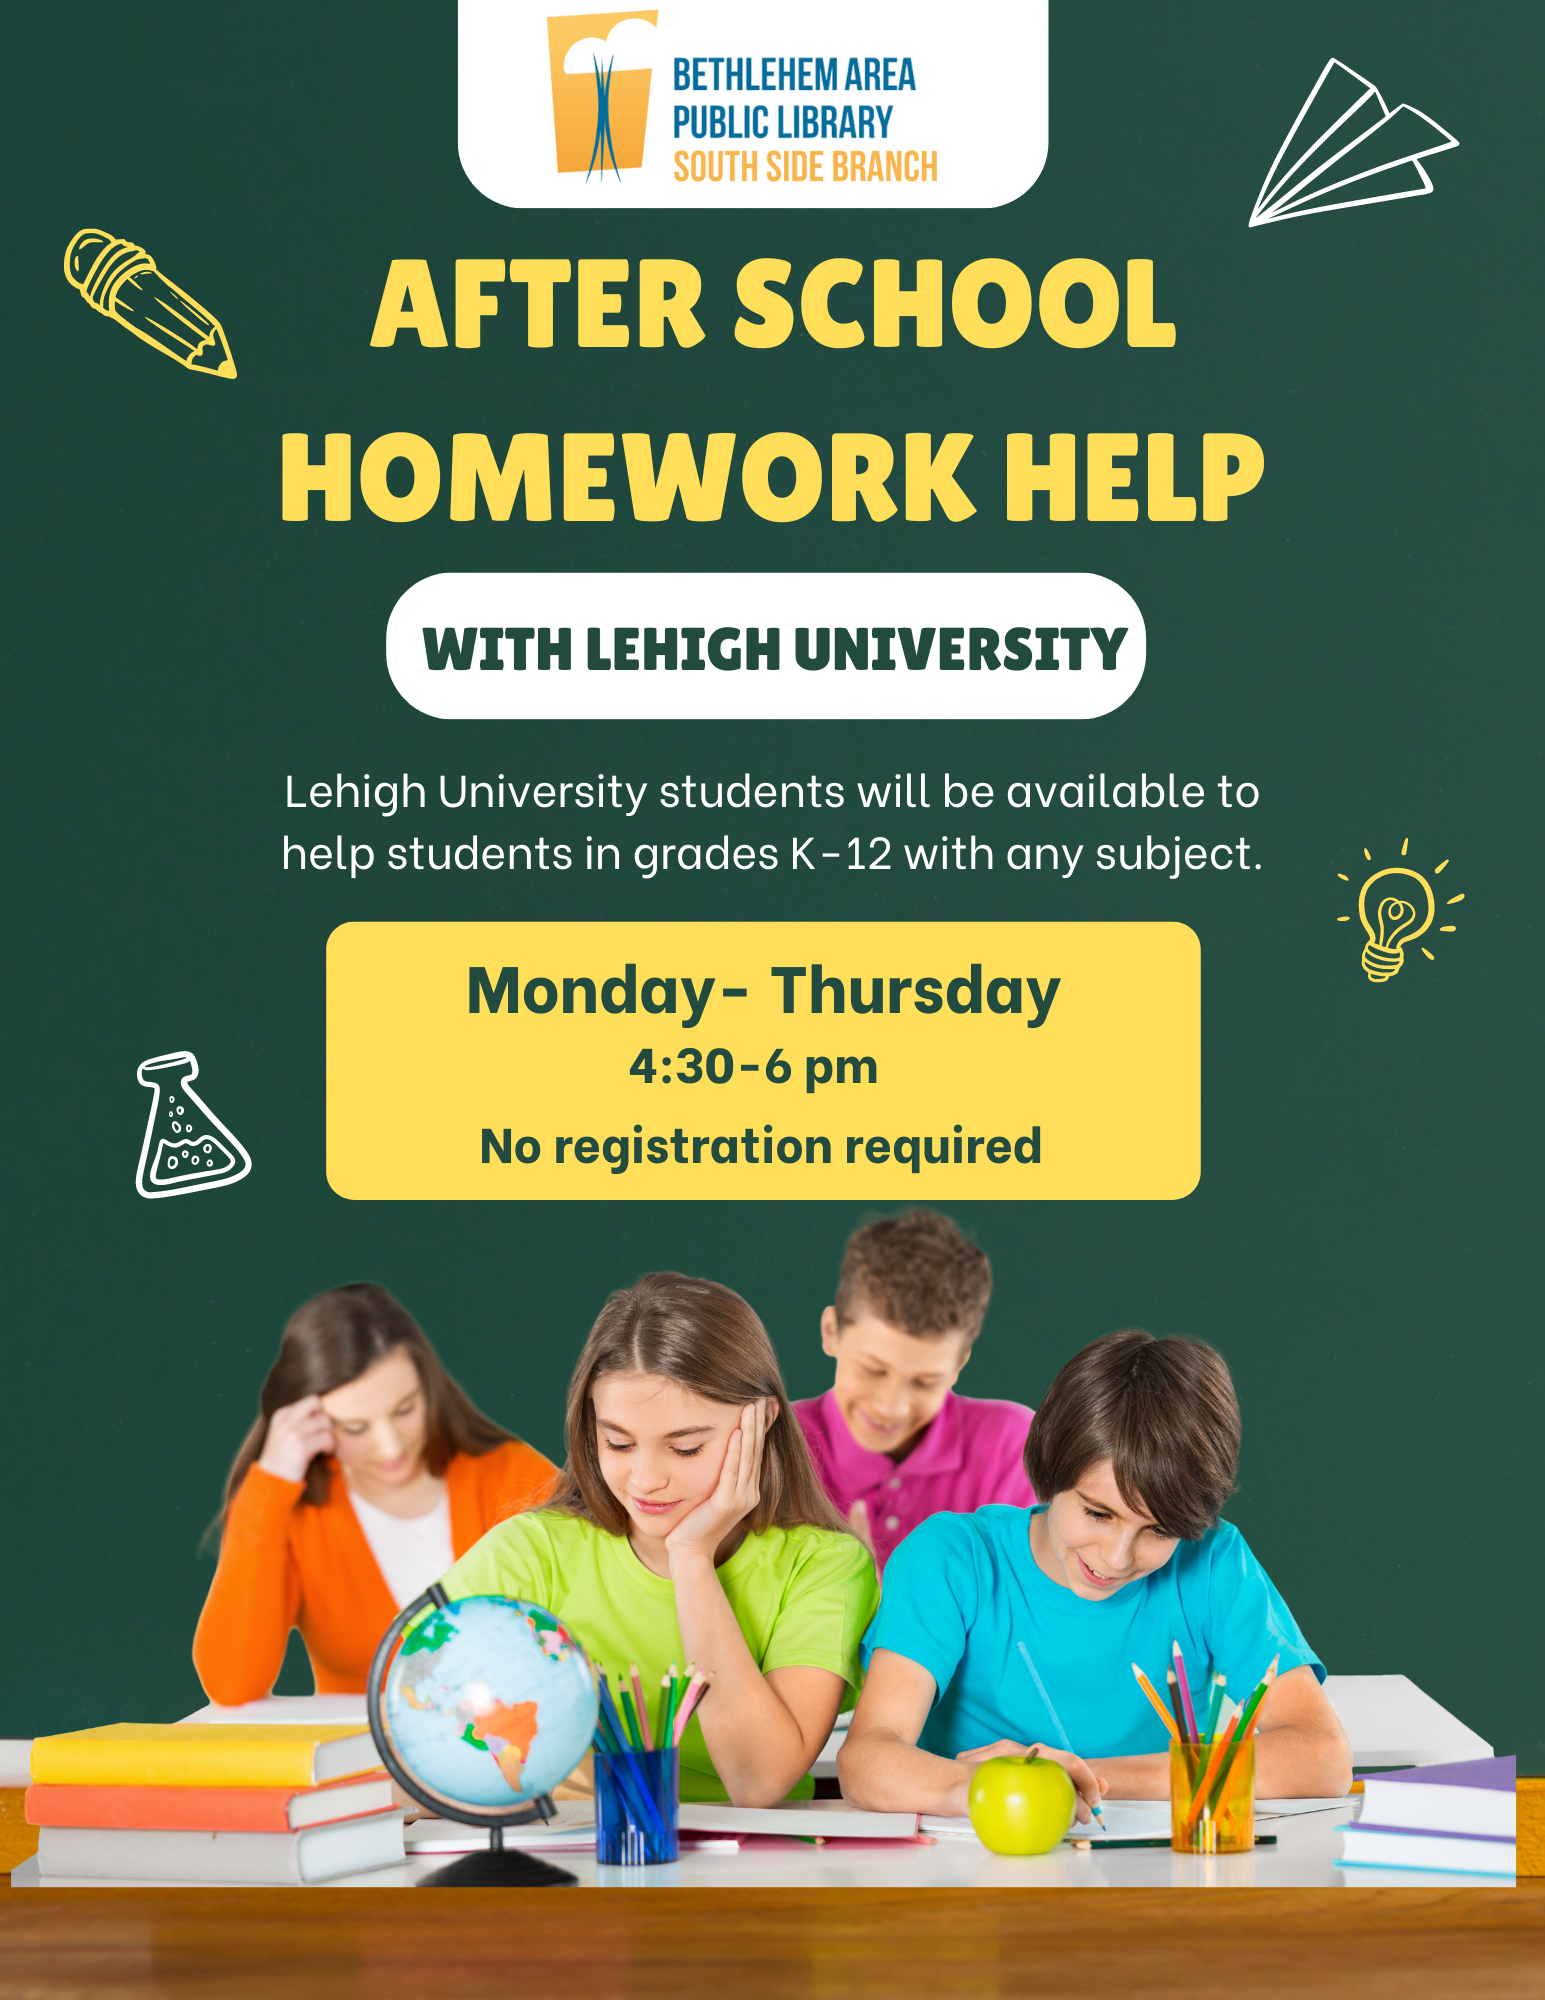 After School Homework Help, Monday-Thursday, Resuming February 12, No Homework Help March 11-14, 4:30-6 pm, What we provide: Lehigh University Tutor, help with any subject, pencils, scrap paper, students K-12